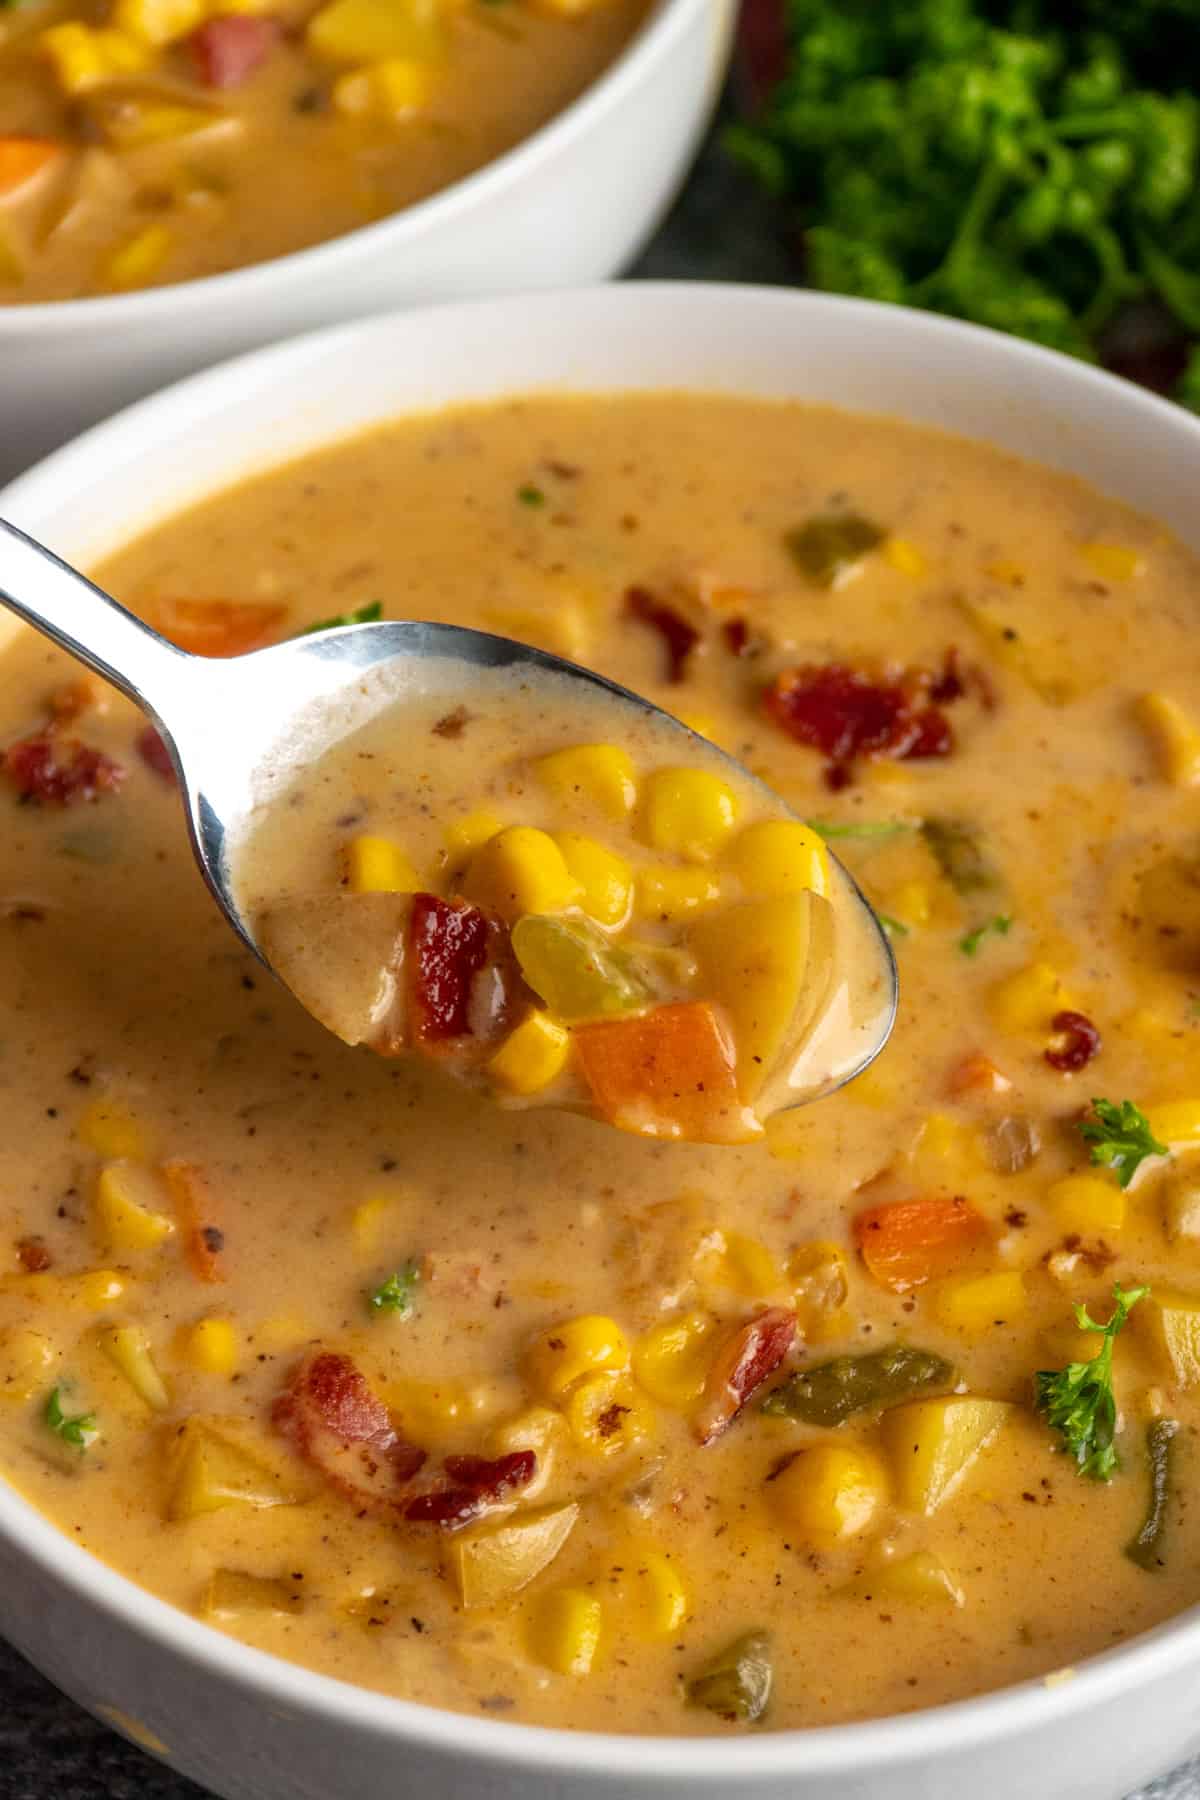 A spoonful of corn chowder over a bowl.